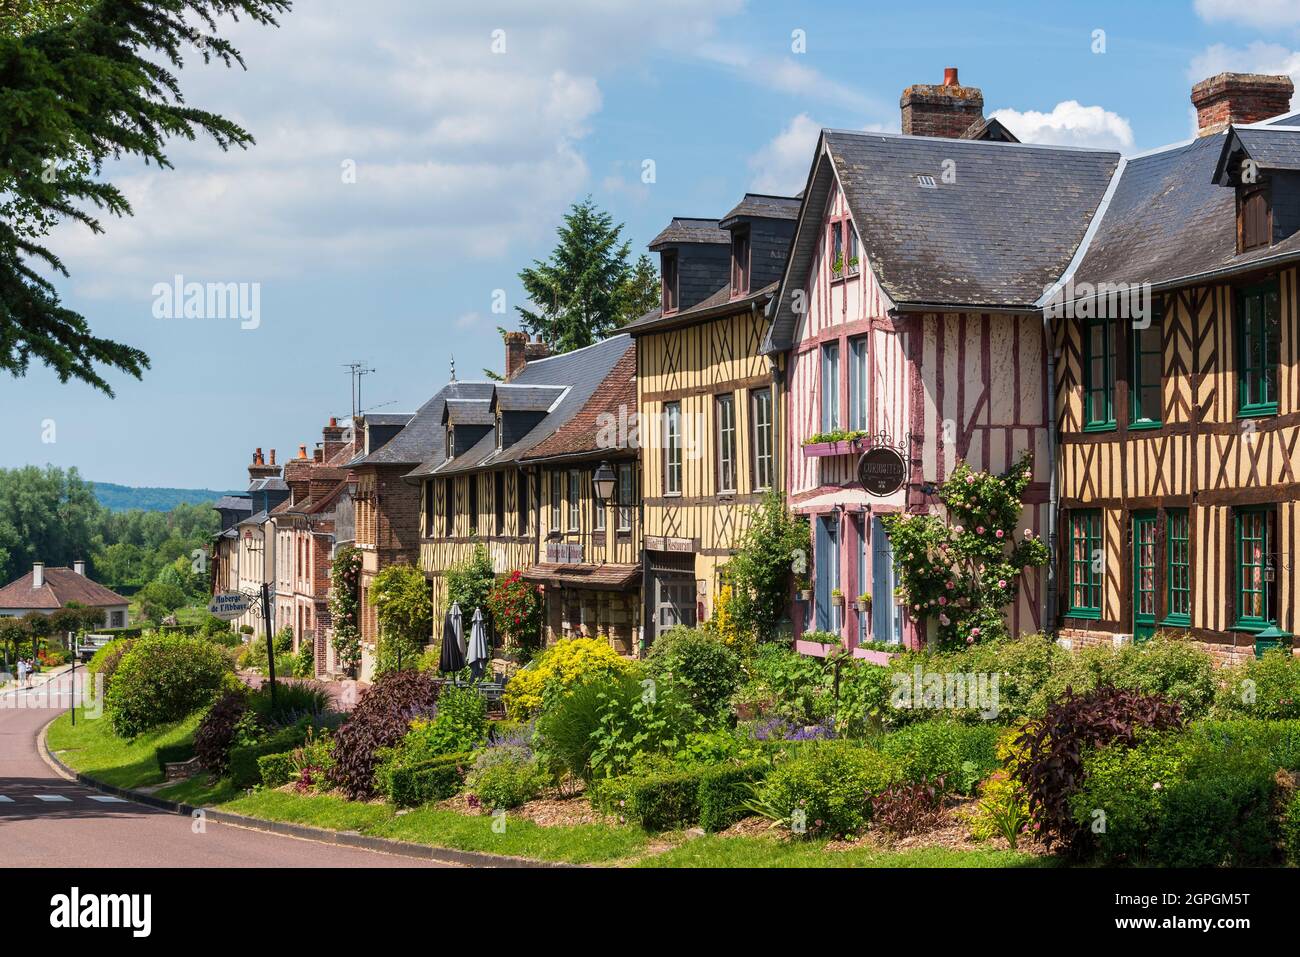 France, Eure, Le Bec Hellouin, labelled Les Plus Beaux Villages de France (The Most Beautiful Villages of France), normand timbered house Stock Photo